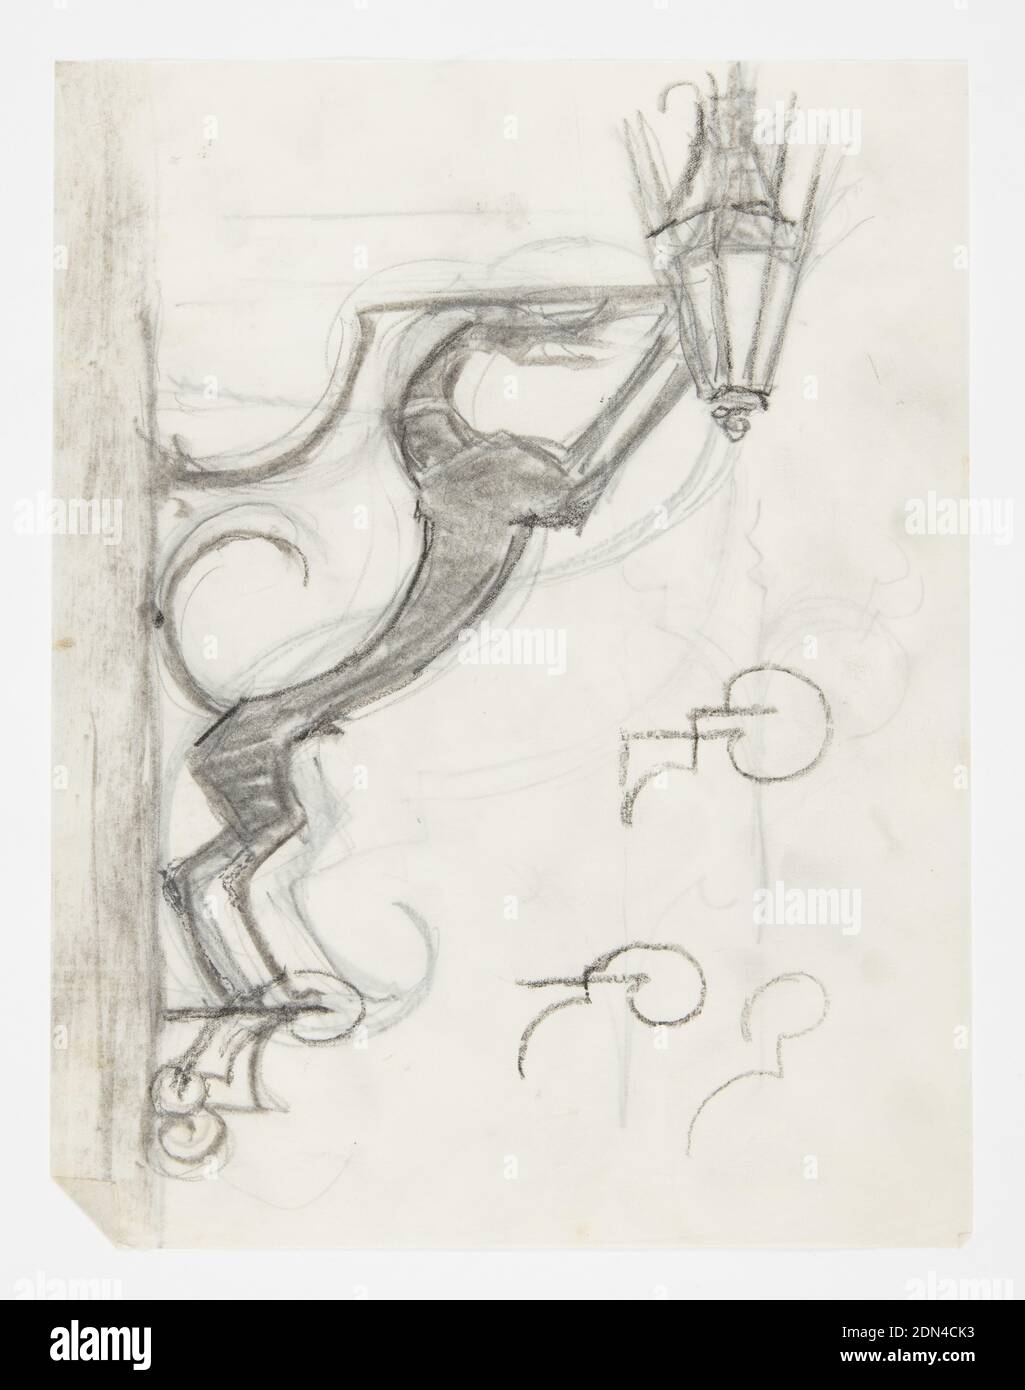 Design for Sconce, Hound, William Hunt Diederich, American, b. Hungary, 1884–1953, Graphite and charcoal on paper, Design for a wall-mounted sconce intended to be executed in metal. Figure of a hound with curling tail forms the armature, the glass lantern at the tips of its outstretched arms. At lower right, sketchy ornamental details., USA, ca. 1920, lighting, Drawing Stock Photo